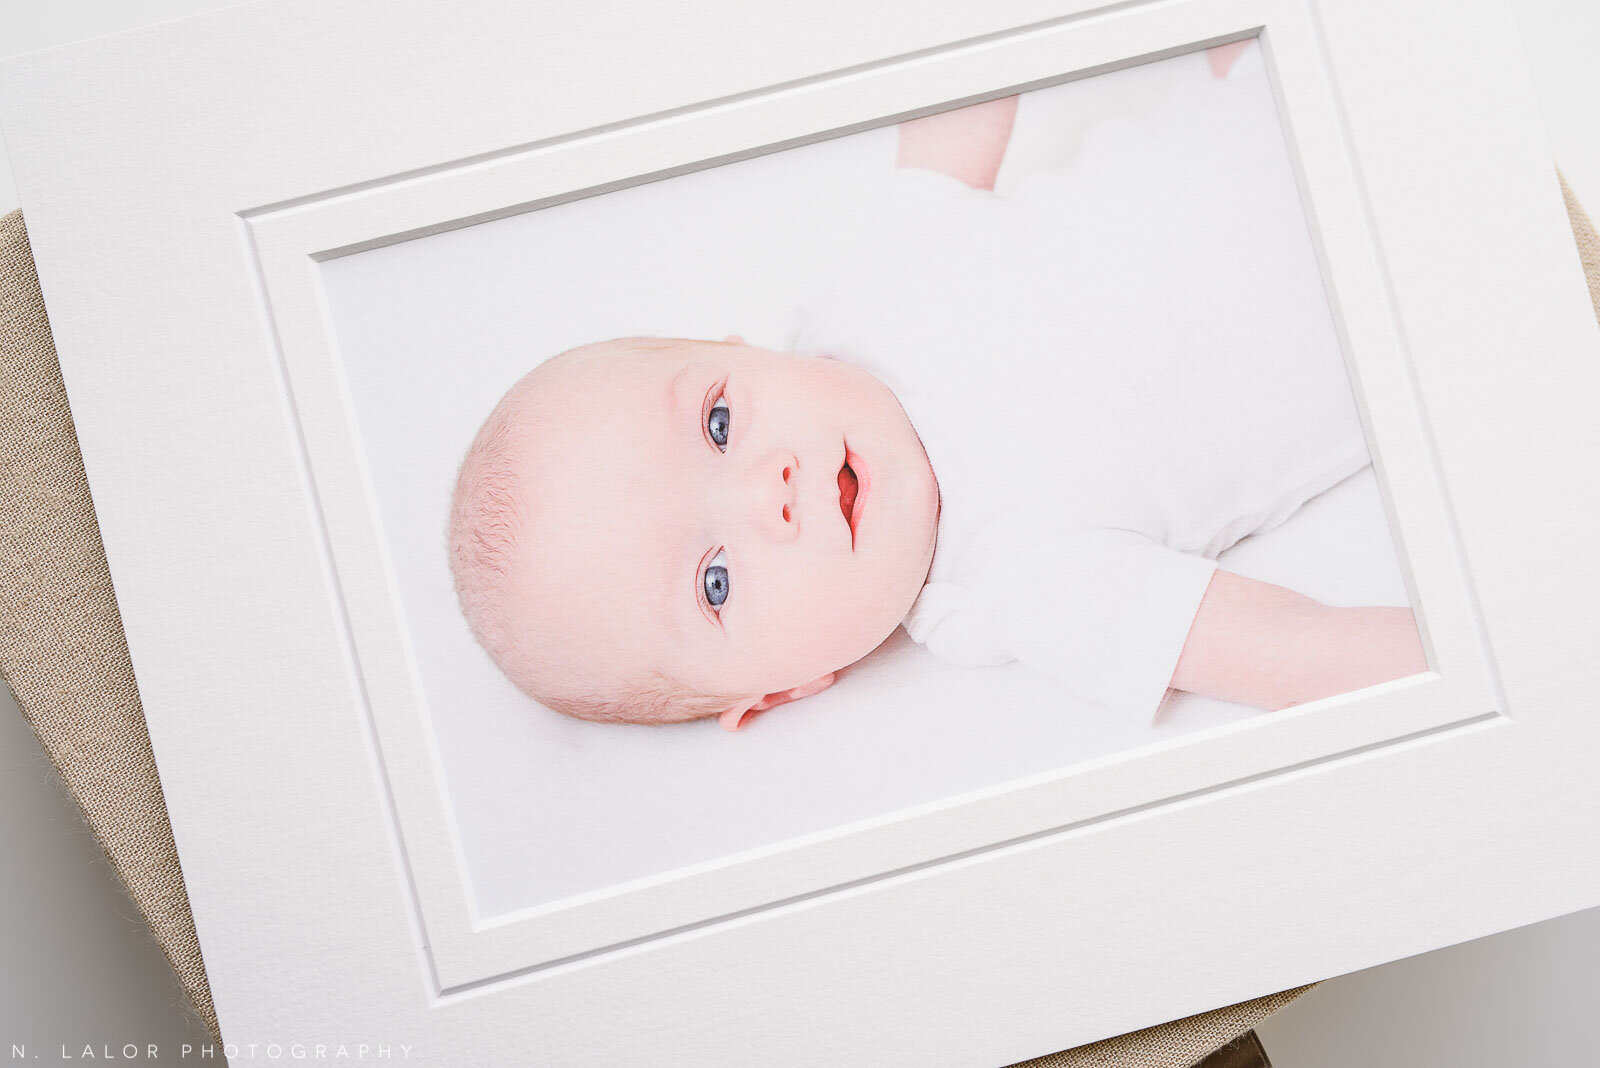 nlalor-photography-2018-twins-baby-photo-session-greenwich-connecticut-7.jpg